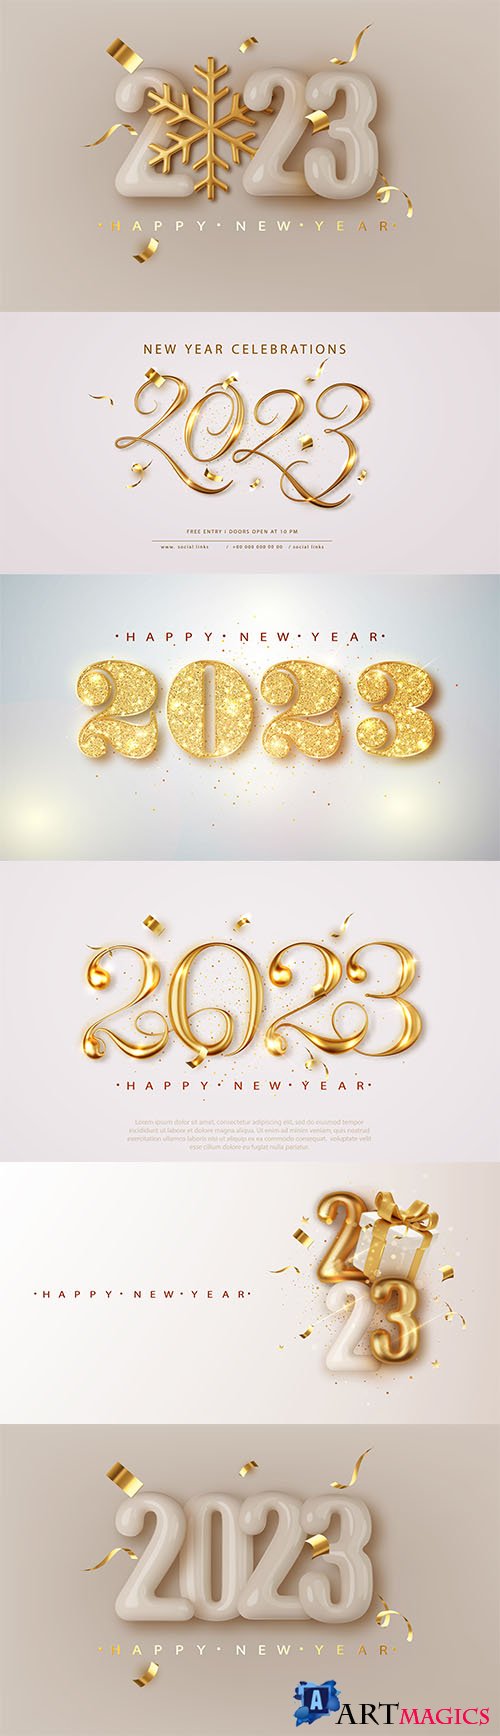 2023 happy new year elegant banner with falling confetti on bright background